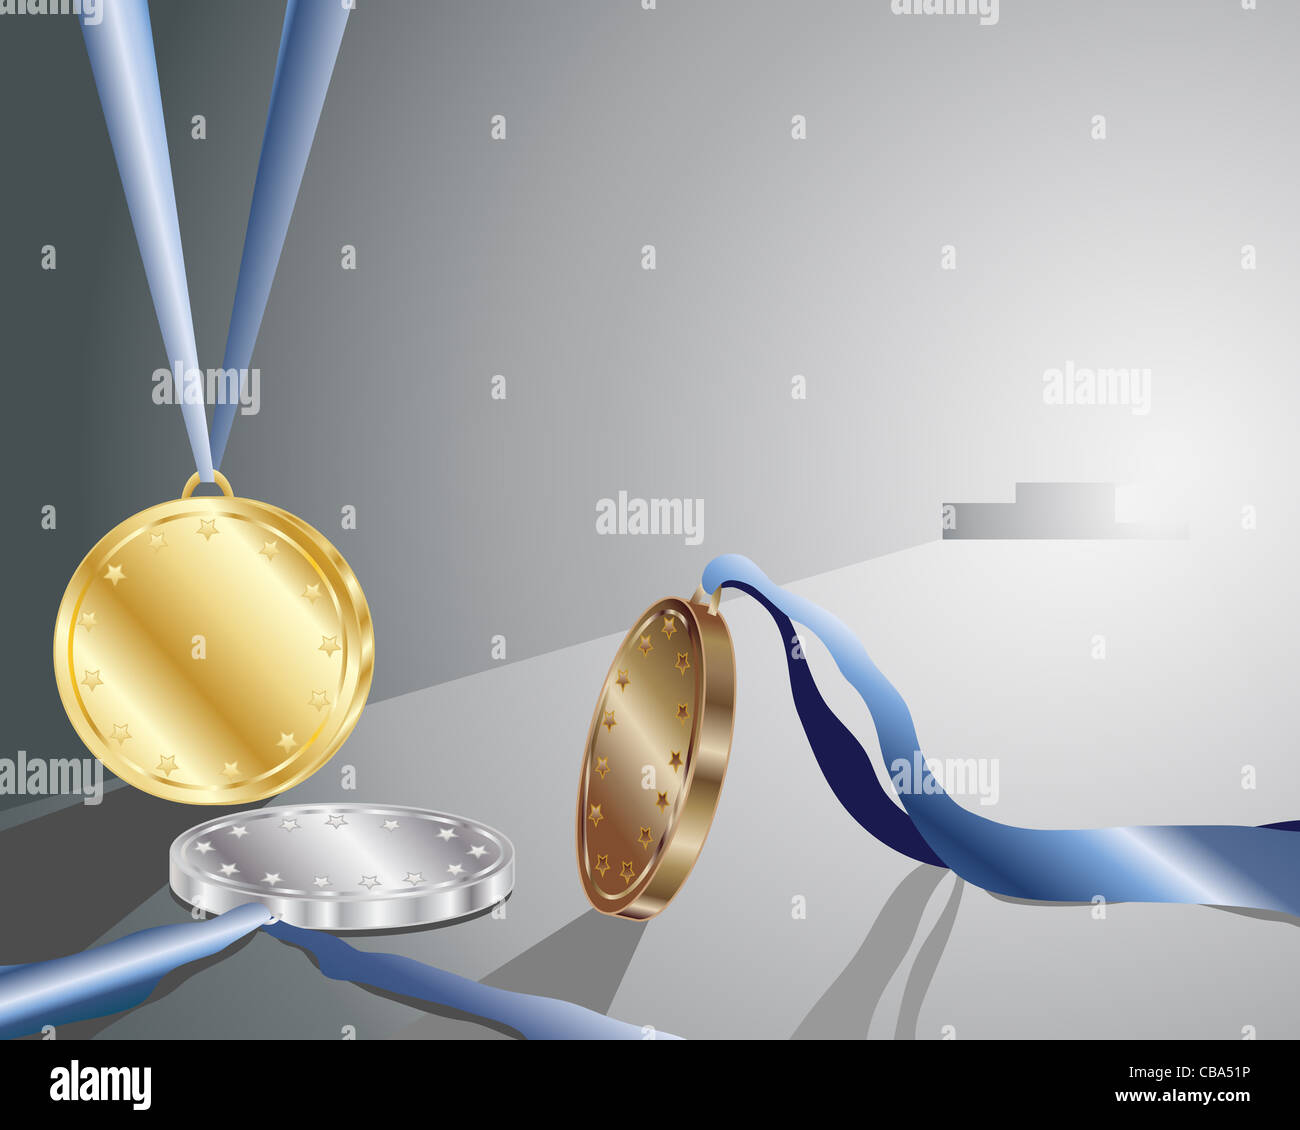 an illustration of gold silver and bronze winners medals in front of a podium backlit in gray light Stock Photo